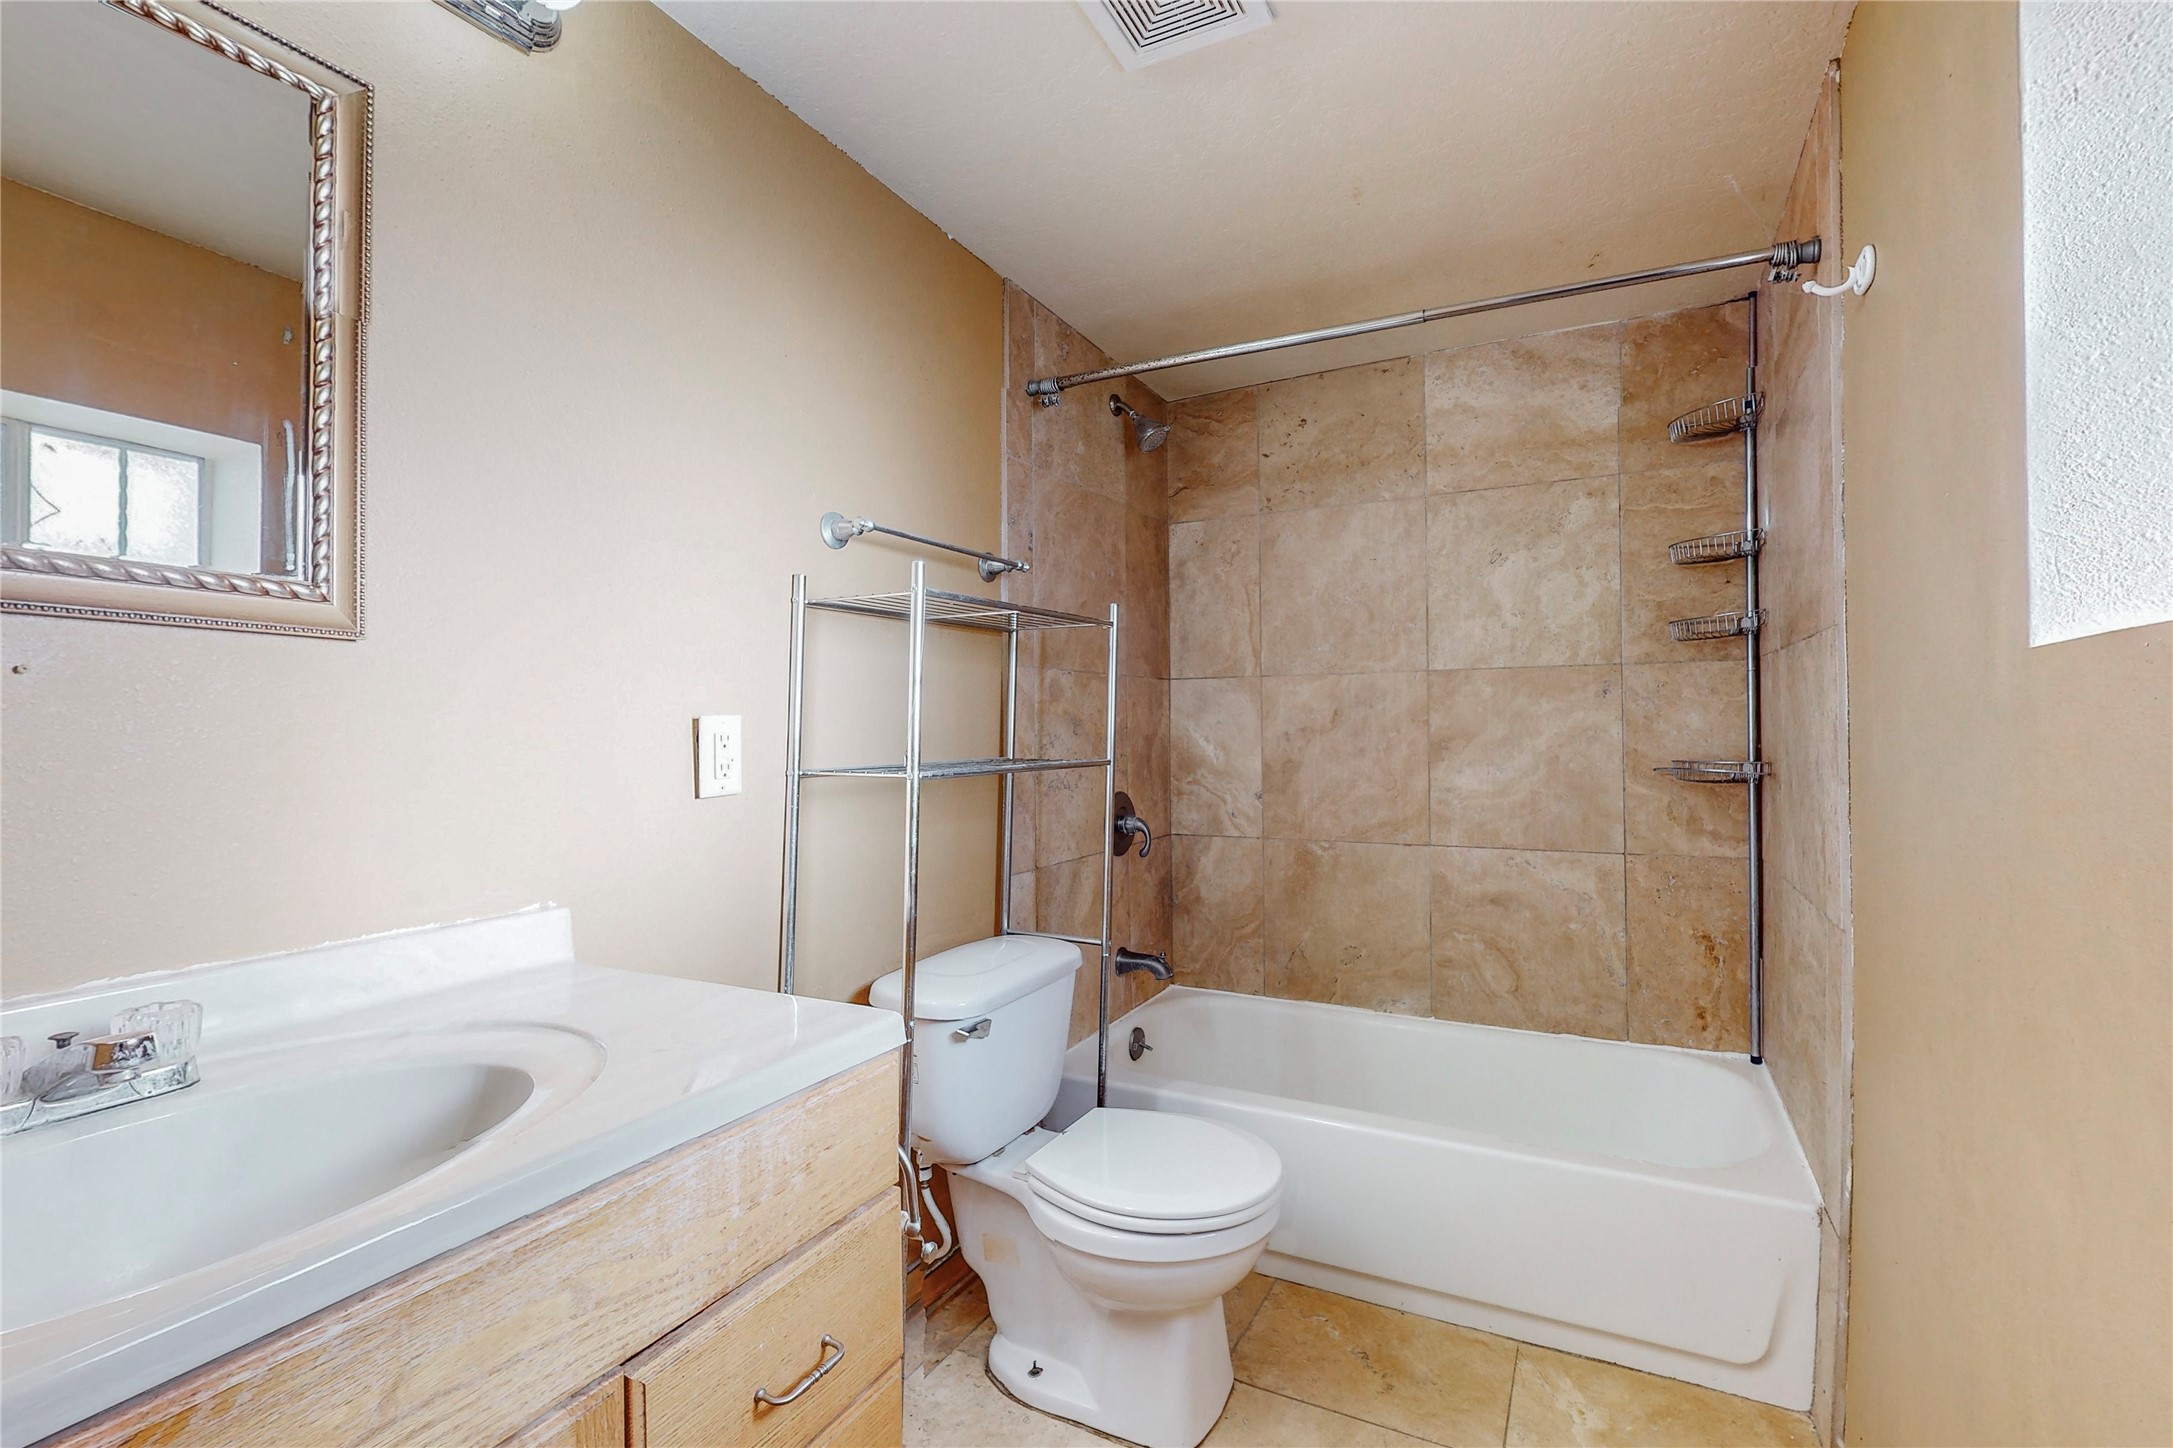 61C Feather C, Santa Fe, New Mexico 87506, 3 Bedrooms Bedrooms, ,2 BathroomsBathrooms,Residential,For Sale,61C Feather C,202341427